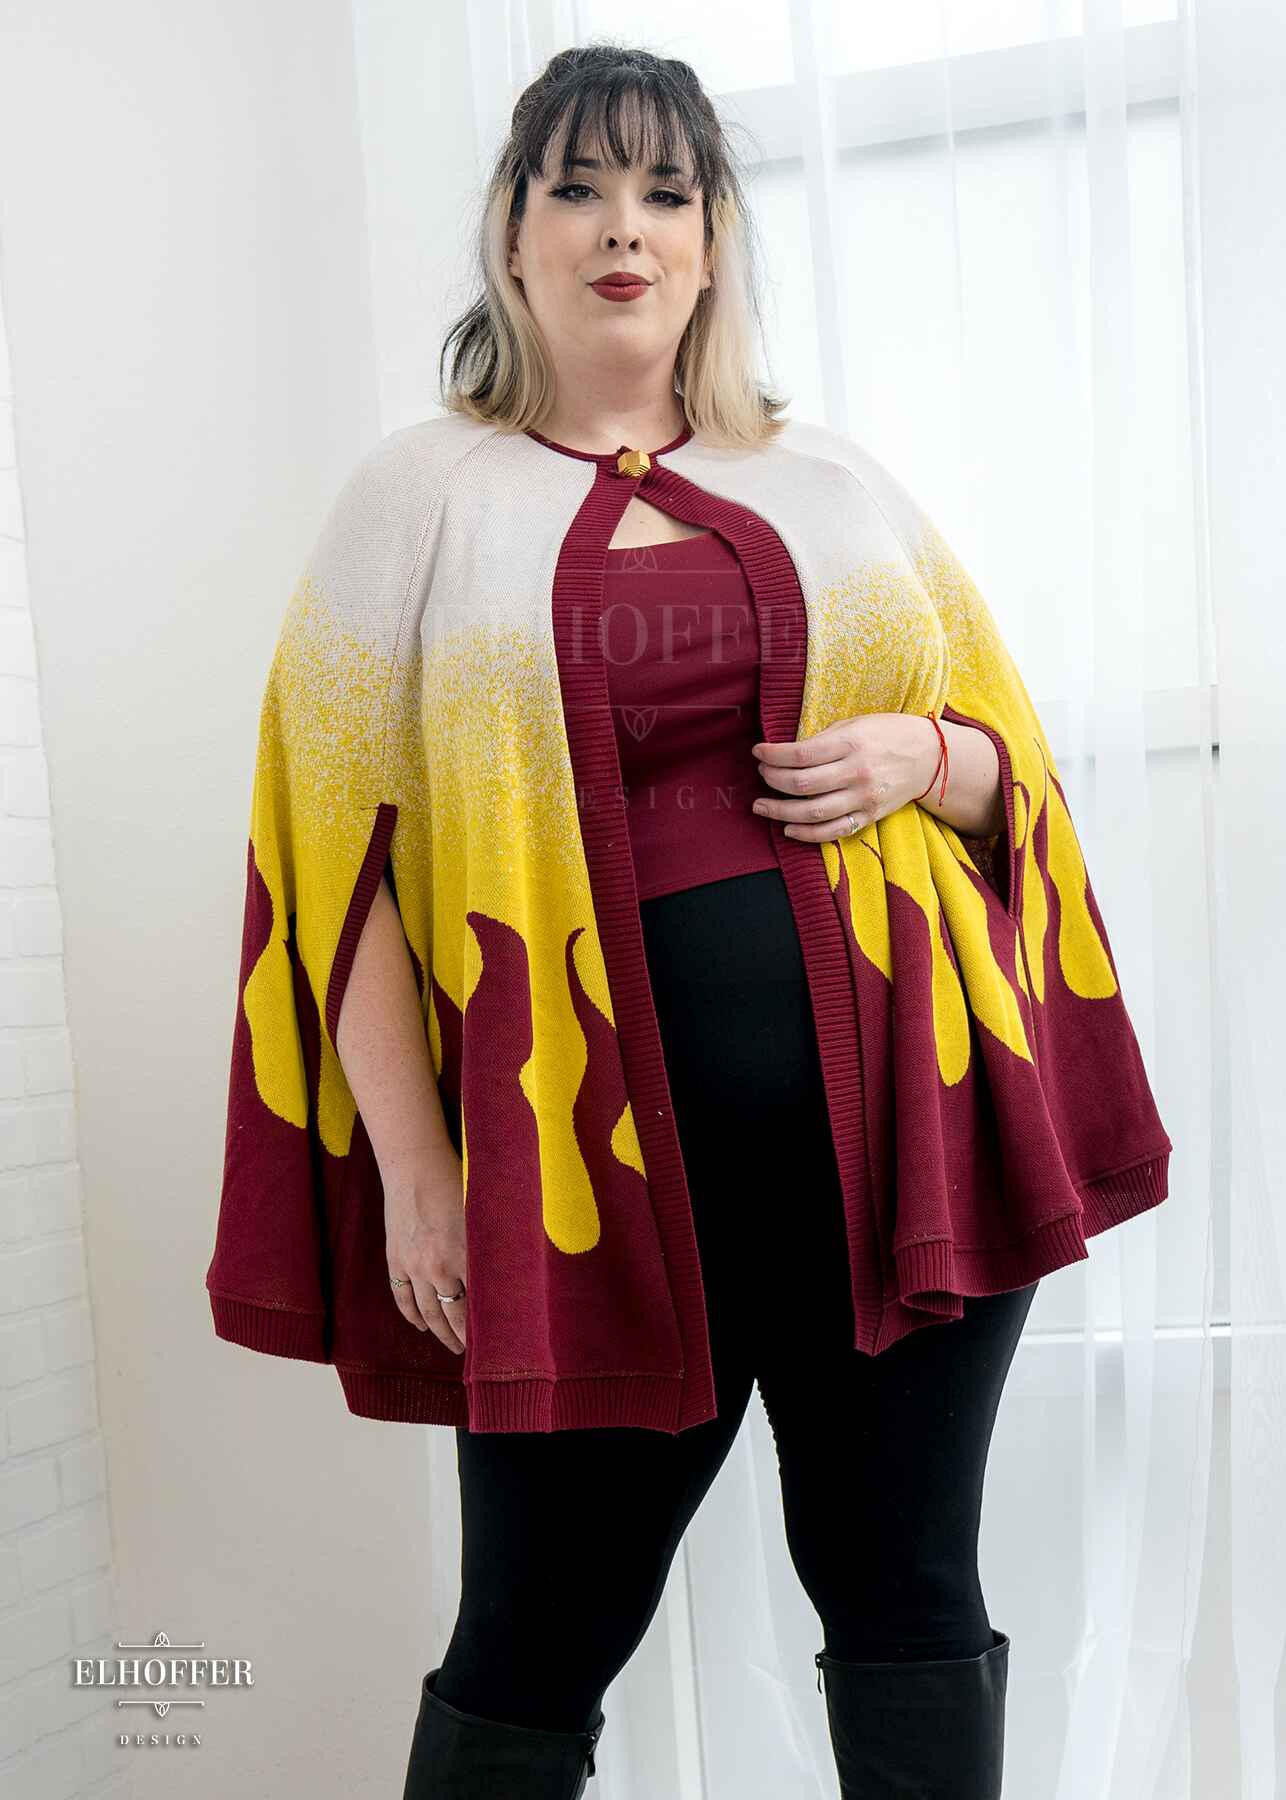 Katie Lynn, a fair skinned 2xl model with short black and blonde hair with bangs, is wearing a below hip length knit cape.  The cape is a gradient of color from white at the shoulders, to yellow, to a red fire design at the bottom, it also has a button closer at the neck, and armholes in the side seam. She paired the cape with a burgundy red scoop neck crop top and black leggings. 